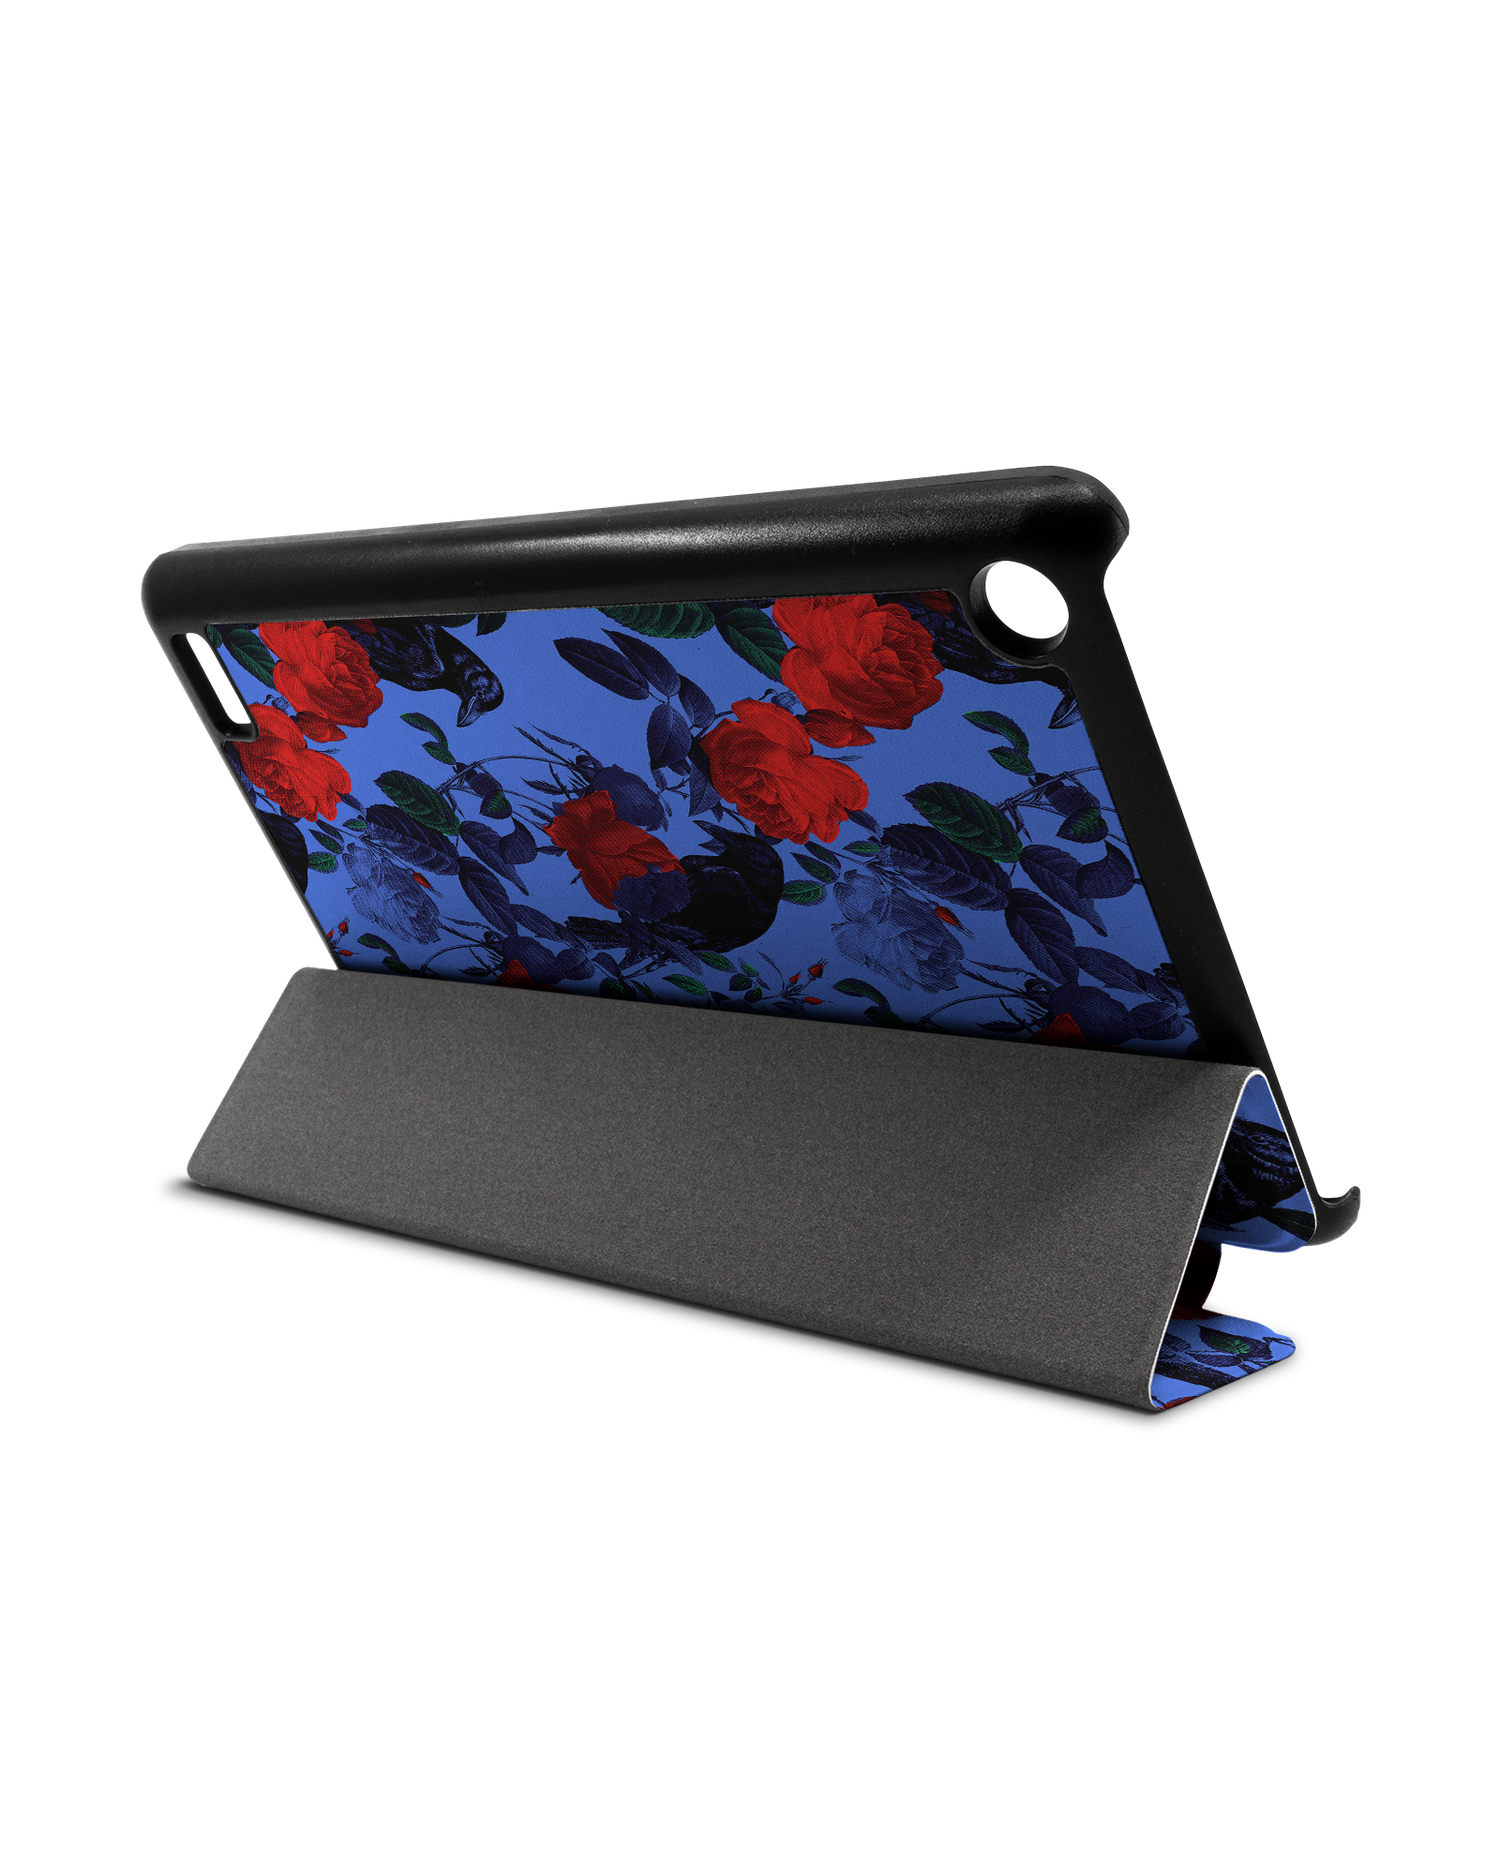 Roses And Ravens Tablet Smart Case for Amazon Fire 7: Used as Stand